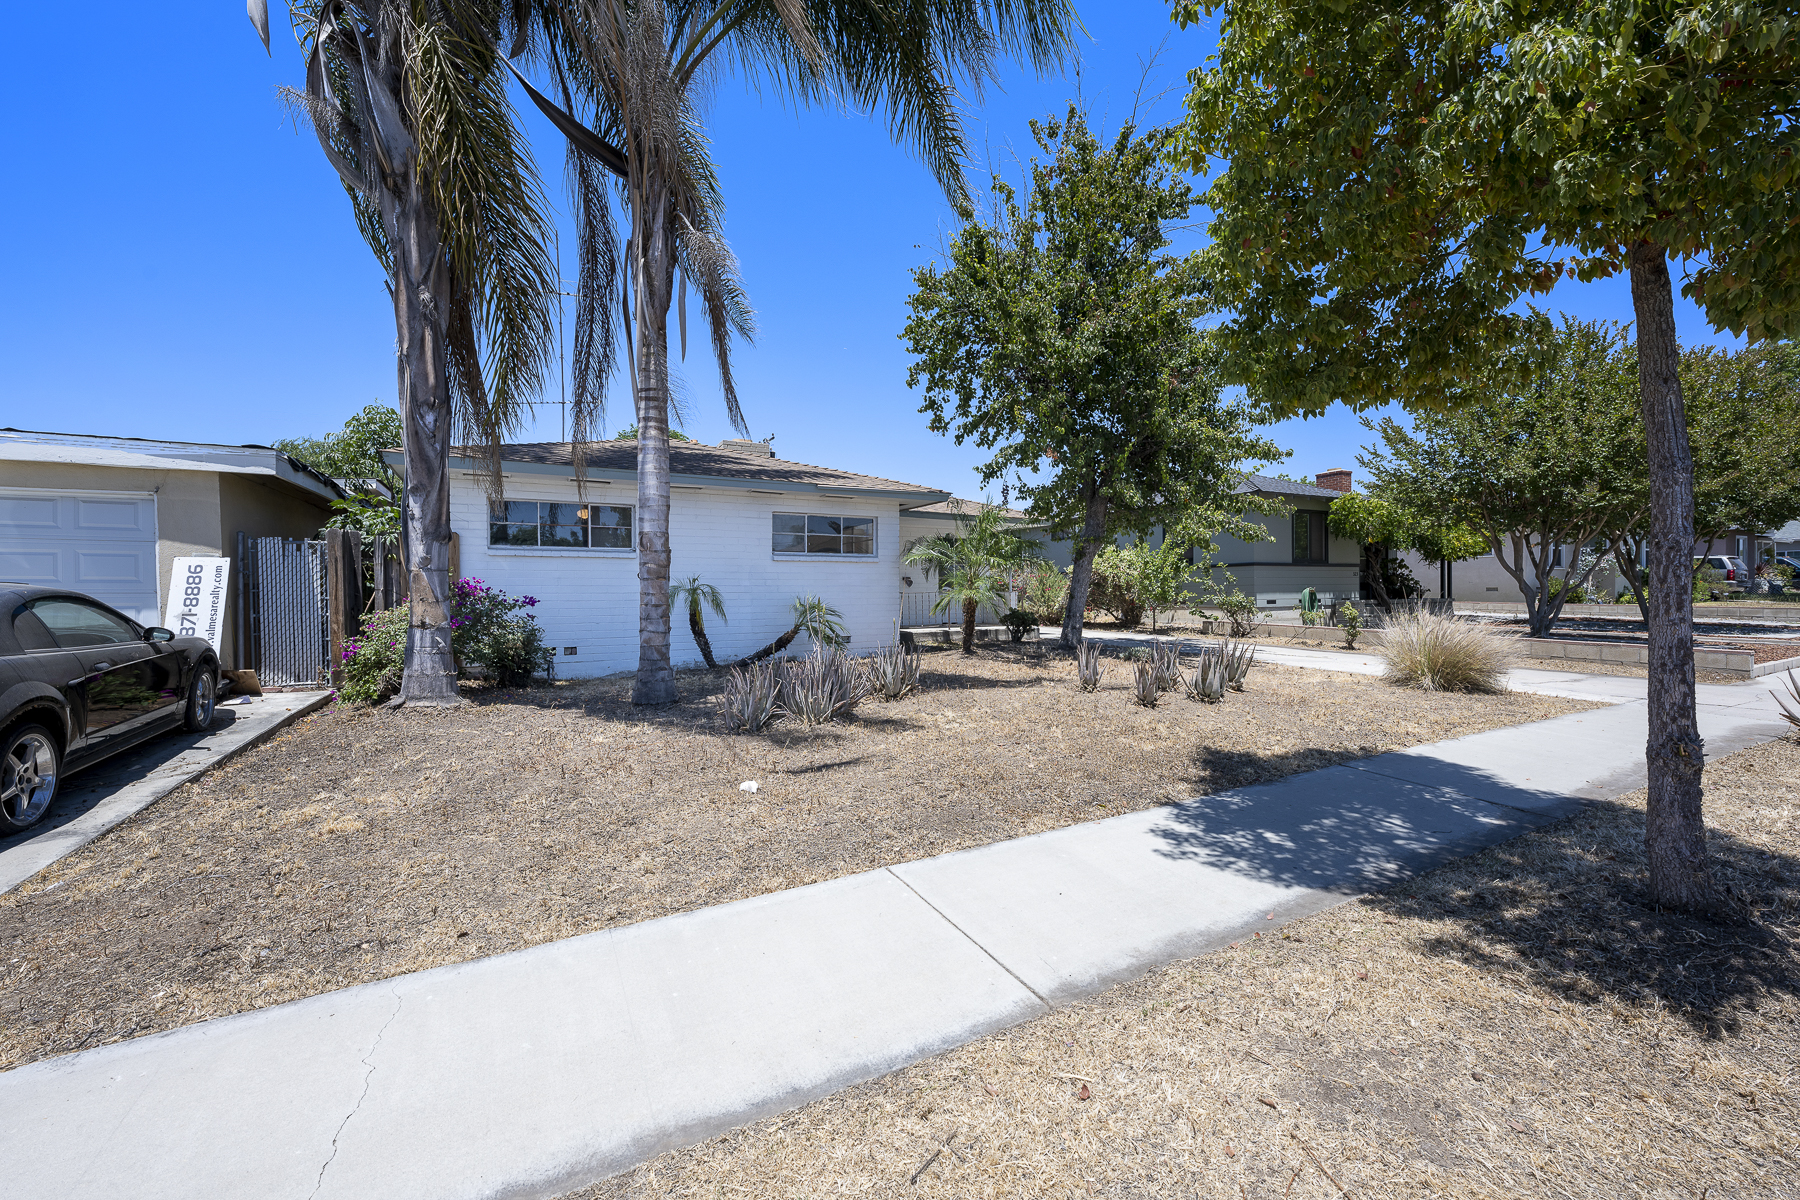 319 E. Francis Ave, La Habra, CA 90631: Exterior shot of front of house and yard, street view.